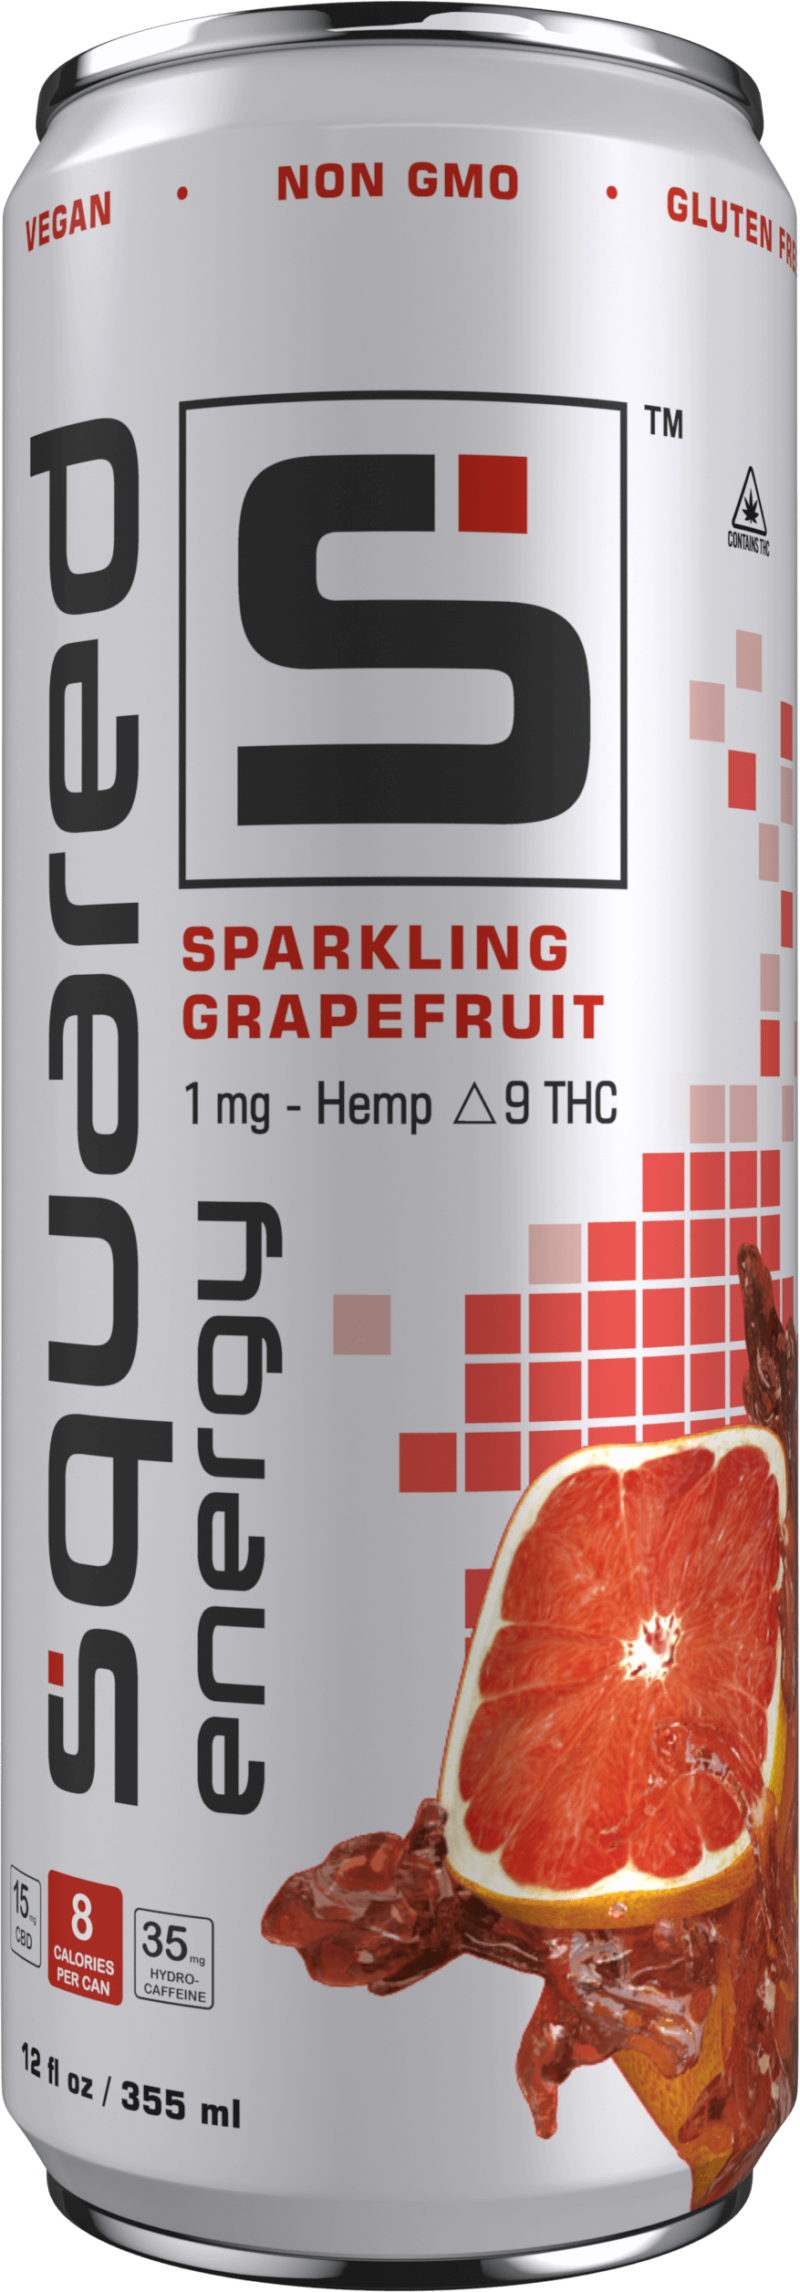 12 ounce sleek aluminum can of Sparkling Grapefruit by Squared Energy